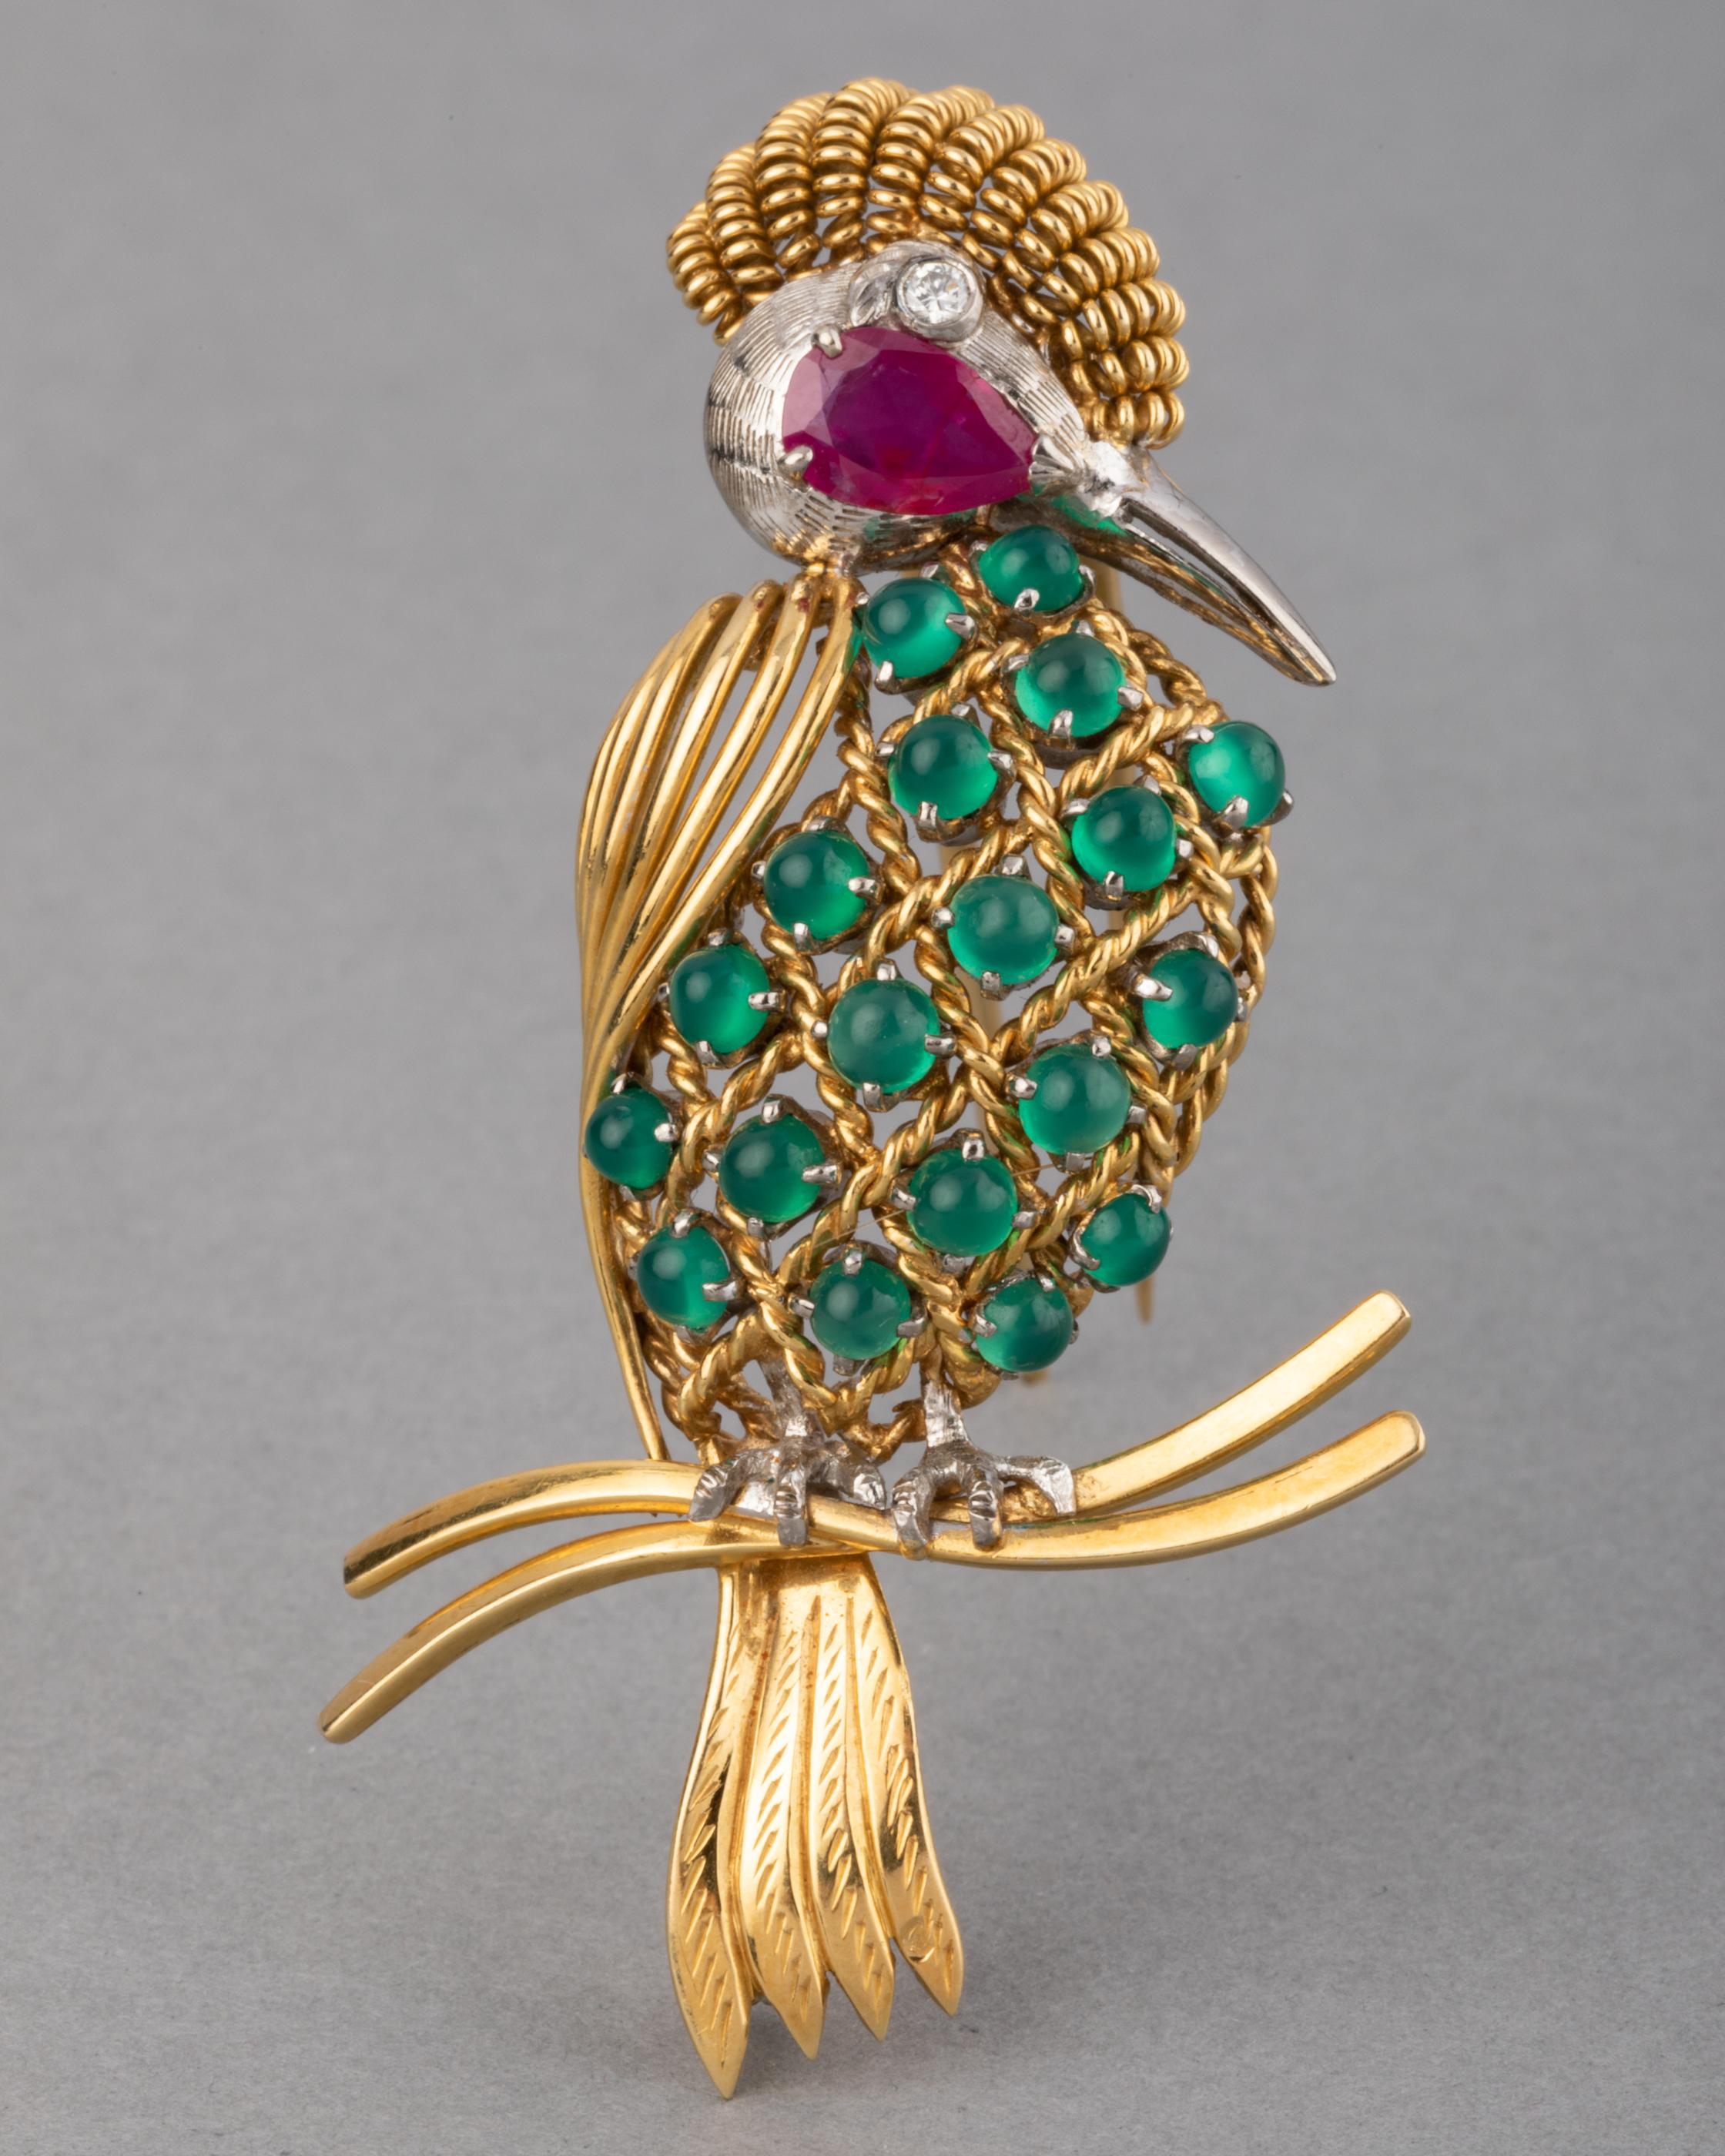 Gold Ruby Diamonds and Chrysoprase  Vintage Bird Brooch

Very beautiful brooch, European made circa 1960. Hallmarks for gold 750 (750 and French mark: the owl).
Craft in yellow gold 18k, diamonds, Chrysoprase cabochons (Green Agate), and Ruby for